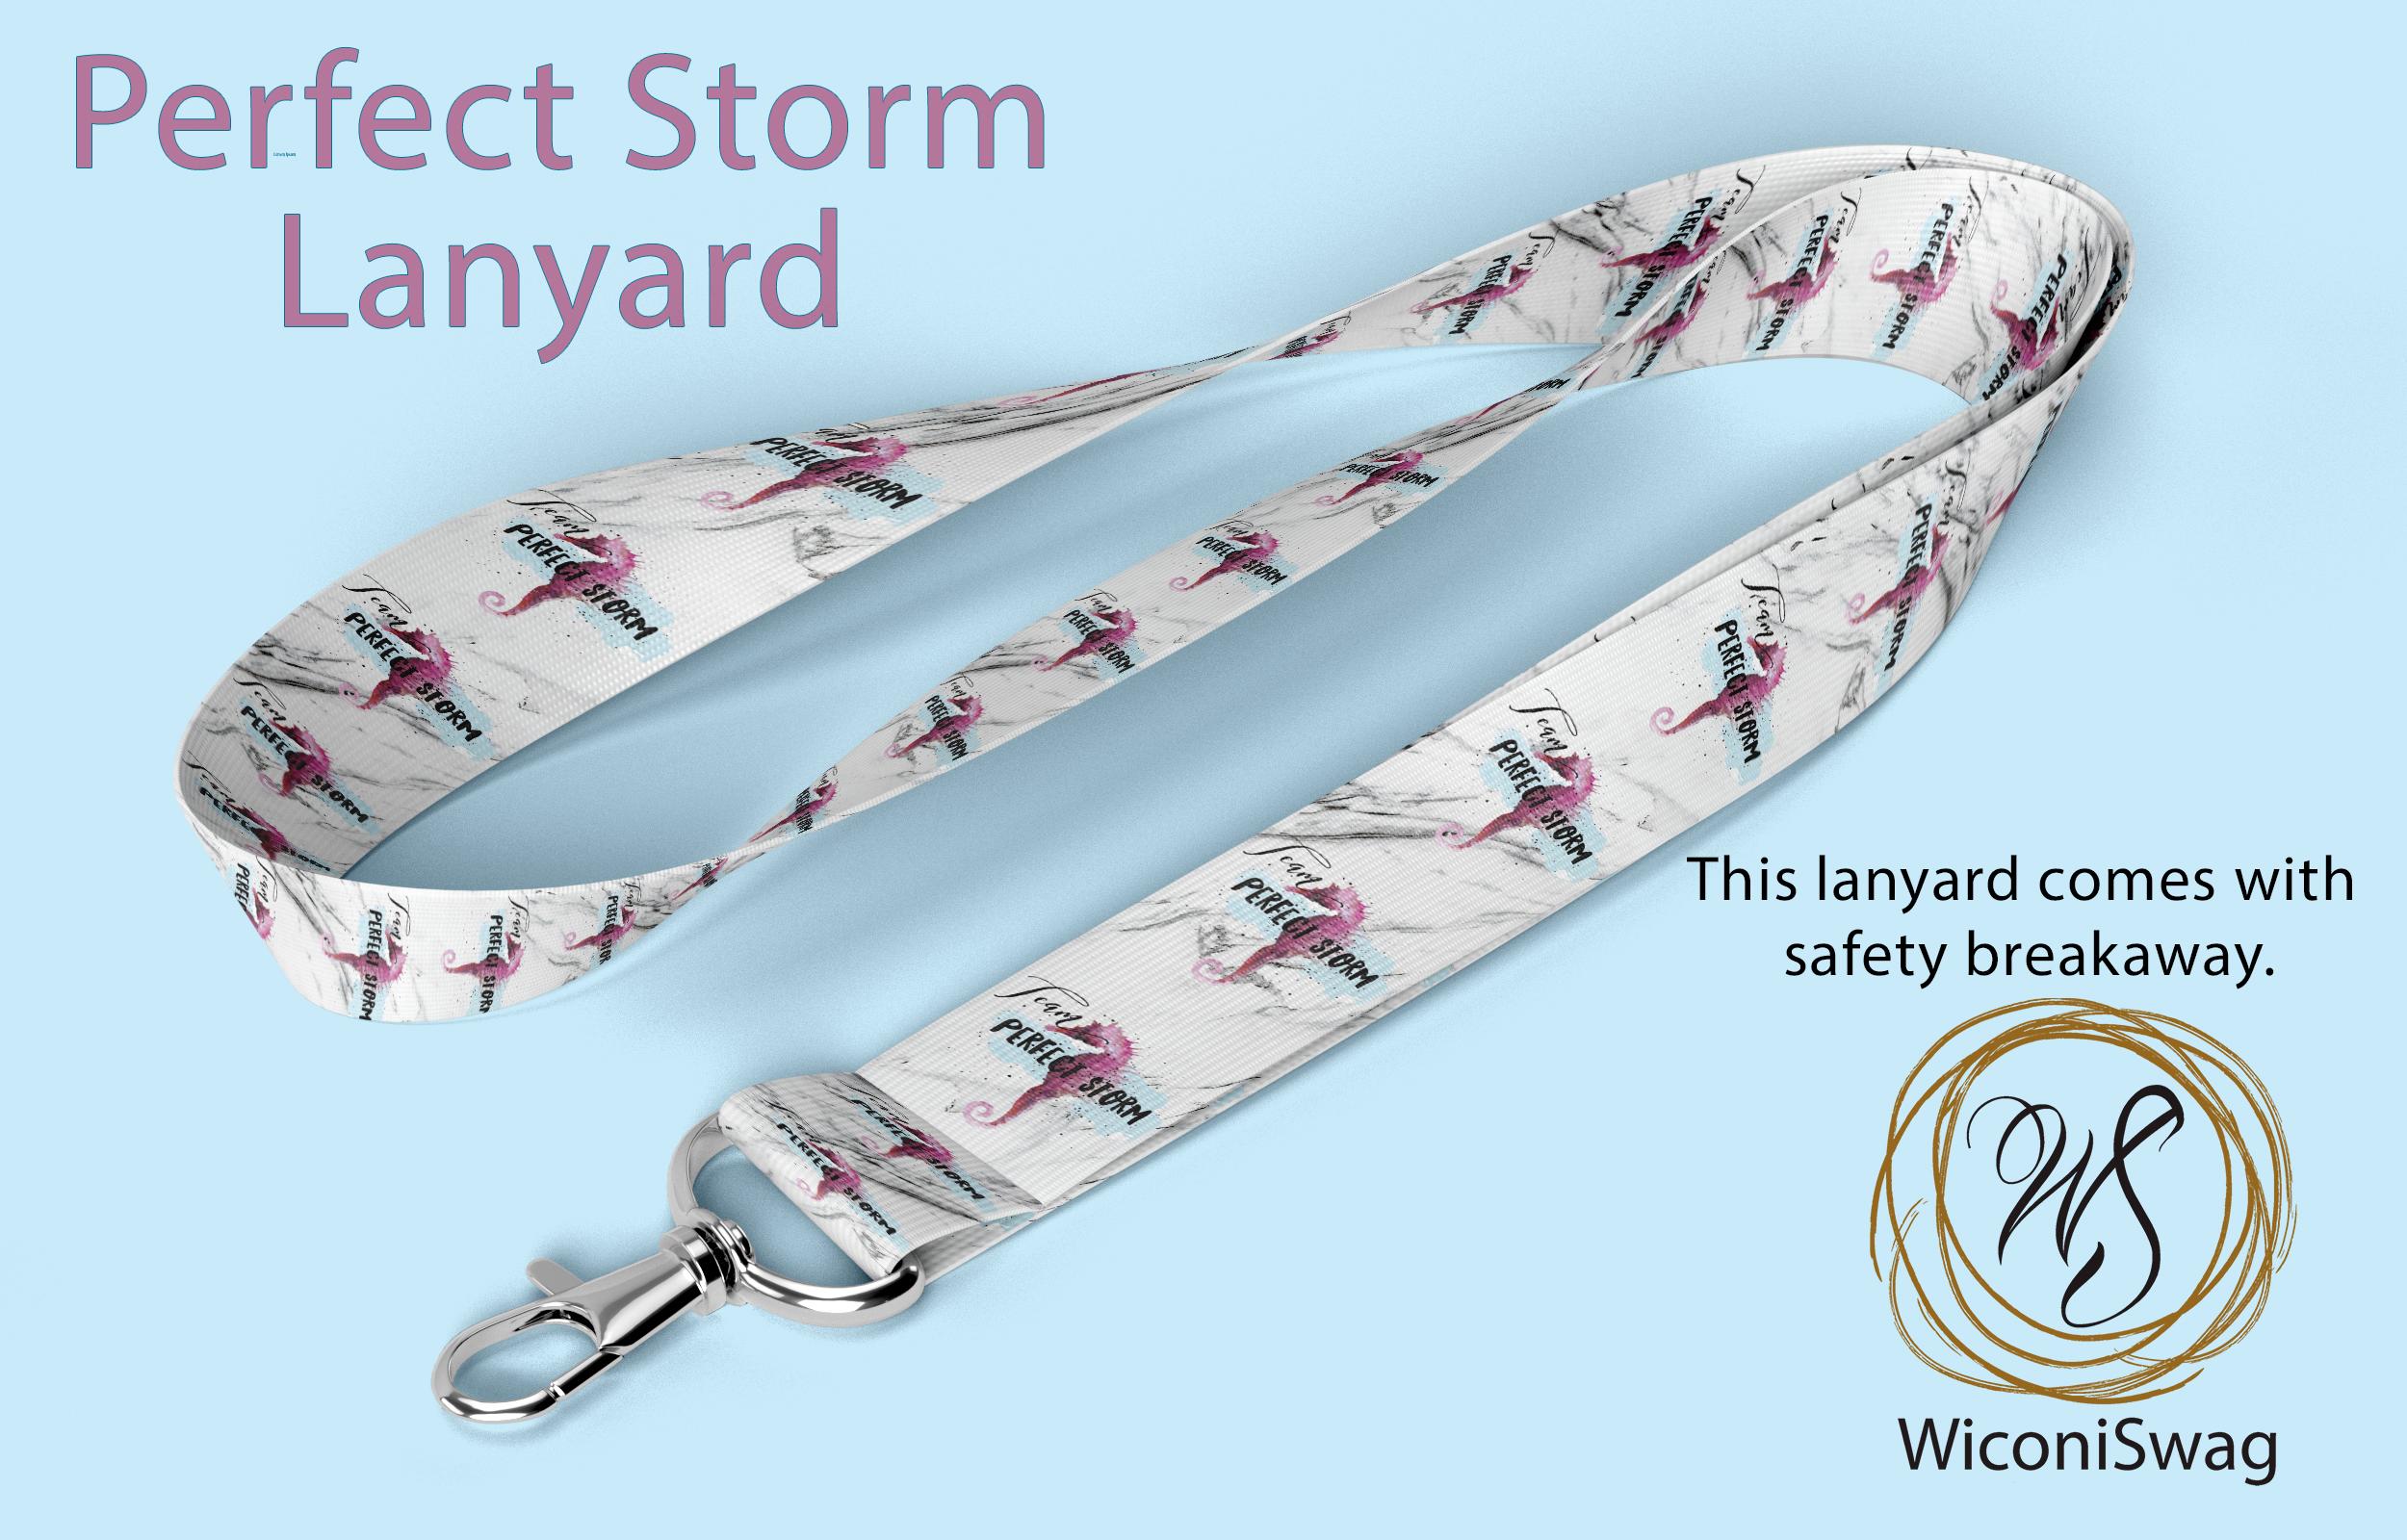 Perfect storm, business lanyard, color street